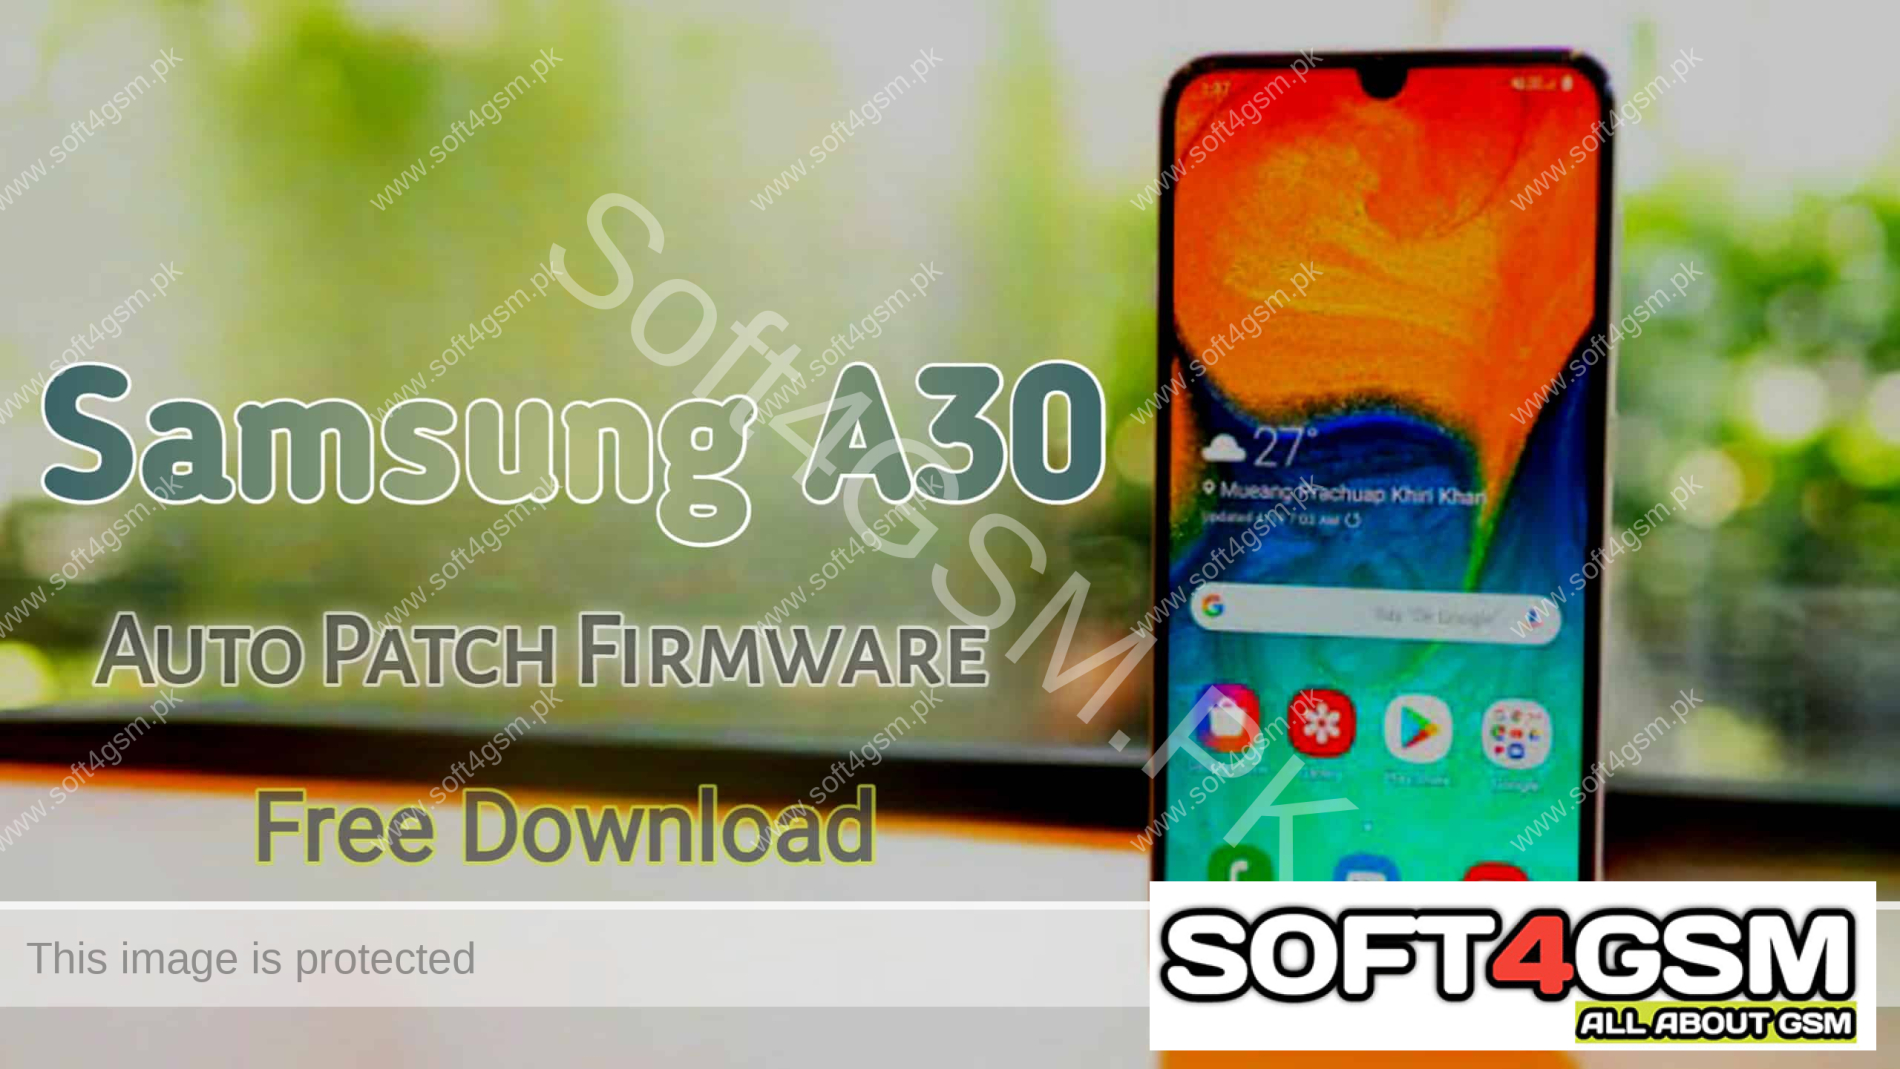 Samsung Galaxy A30 SM-A305F BIT6 Auto Patch Firmware With Call Recorder Free Download BY SOFT4GSM.PK